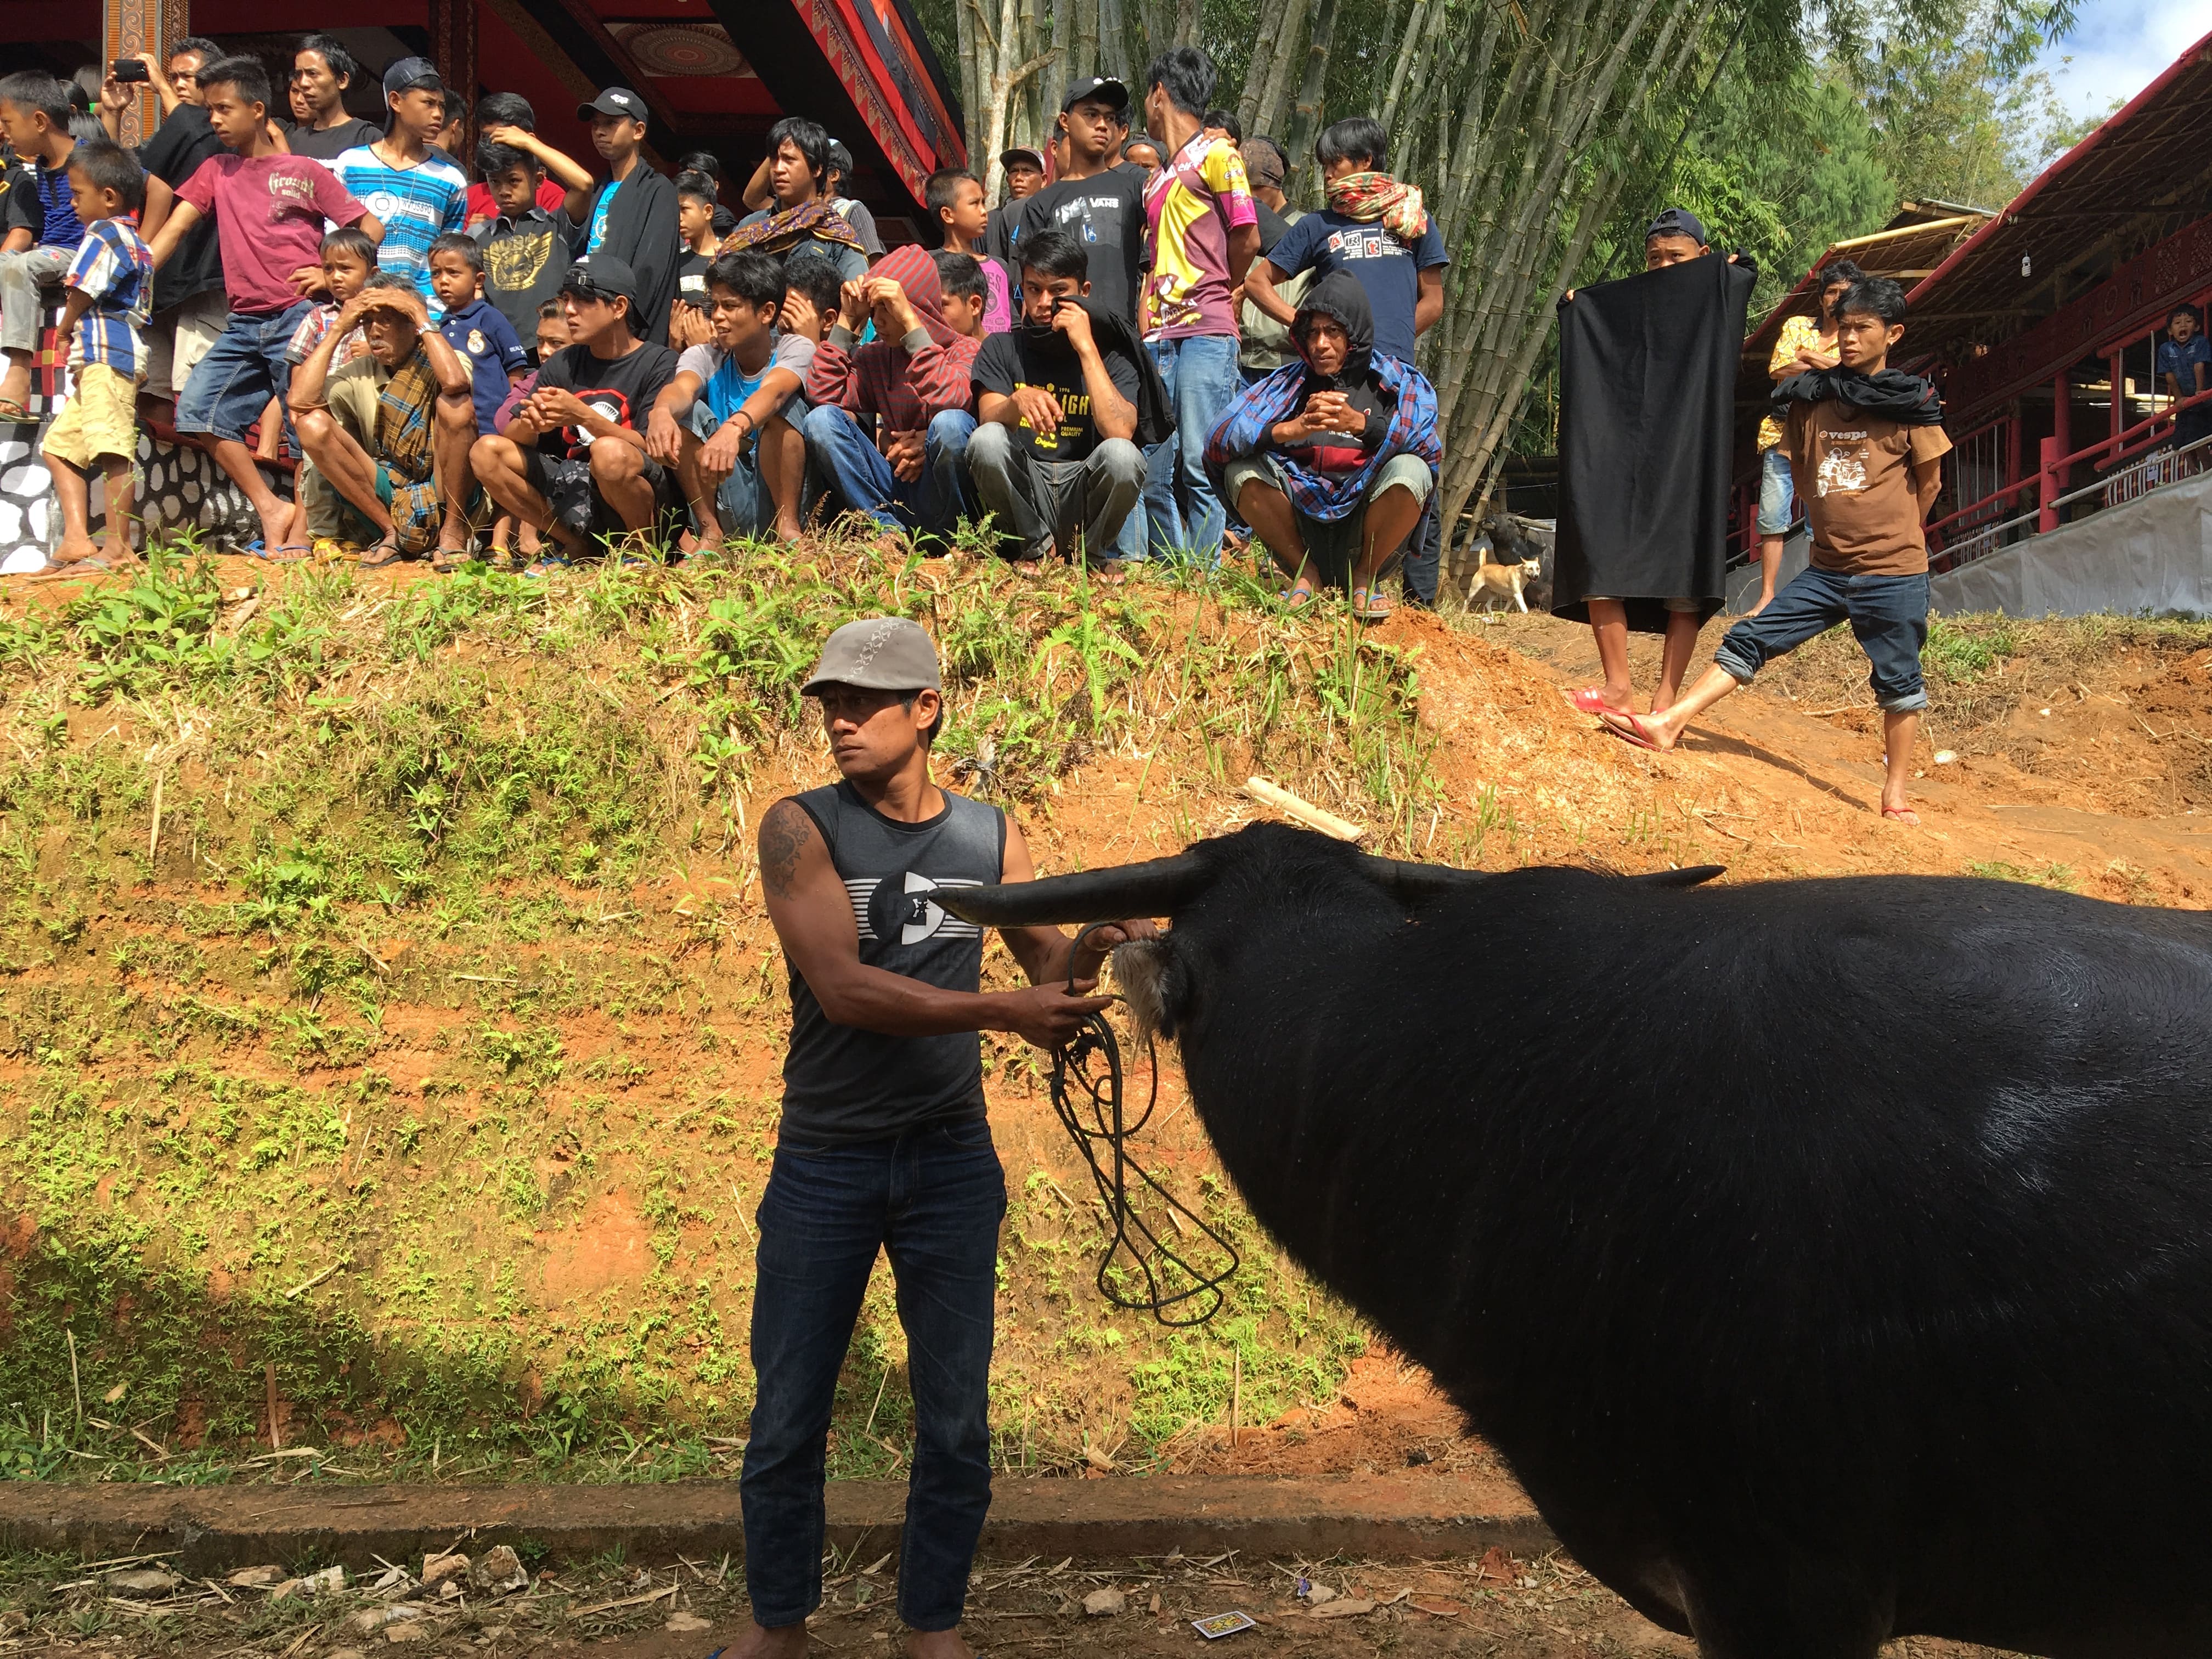 A Torajan man at the funeral prepares a bull for slaughter as onlookers, most of them with no relation to the departed, await the free distributed meat. In Aluk (“The Way”) belief, one cannot enter paradise until buffalo (or pigs, for the less wealthy) are ritually sacrificed during the funeral.